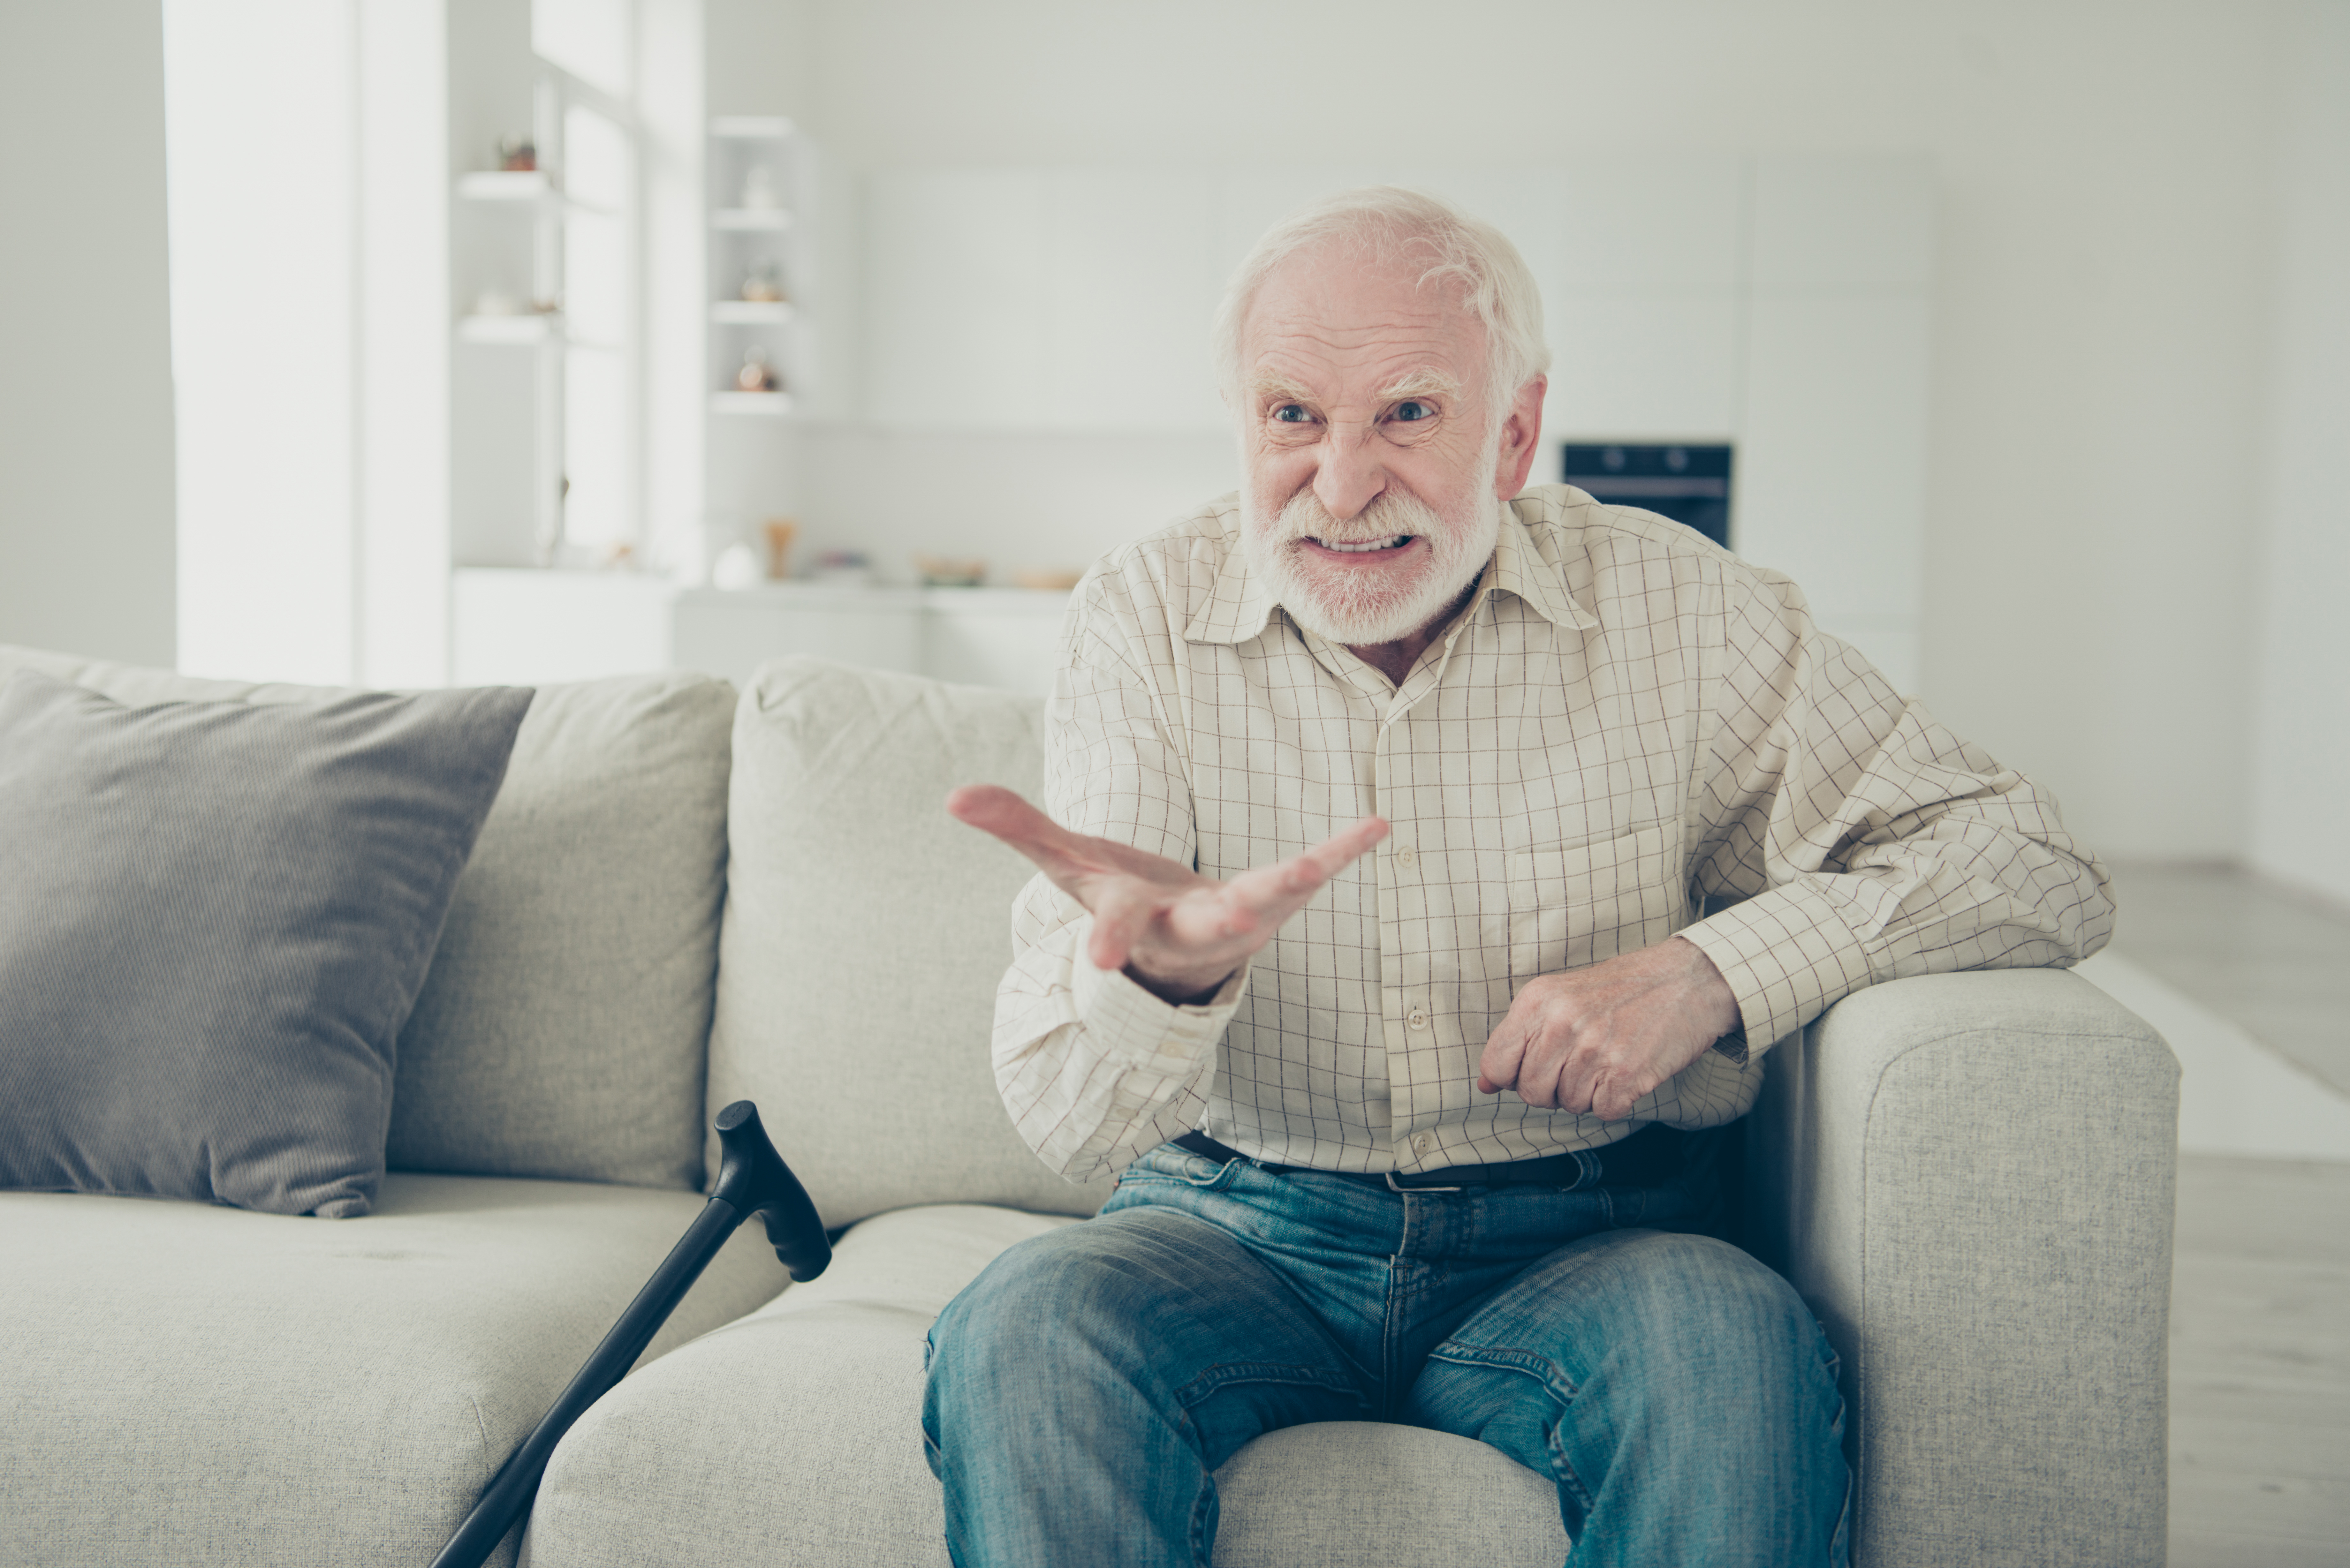 An angry older man | Source: Shutterstock